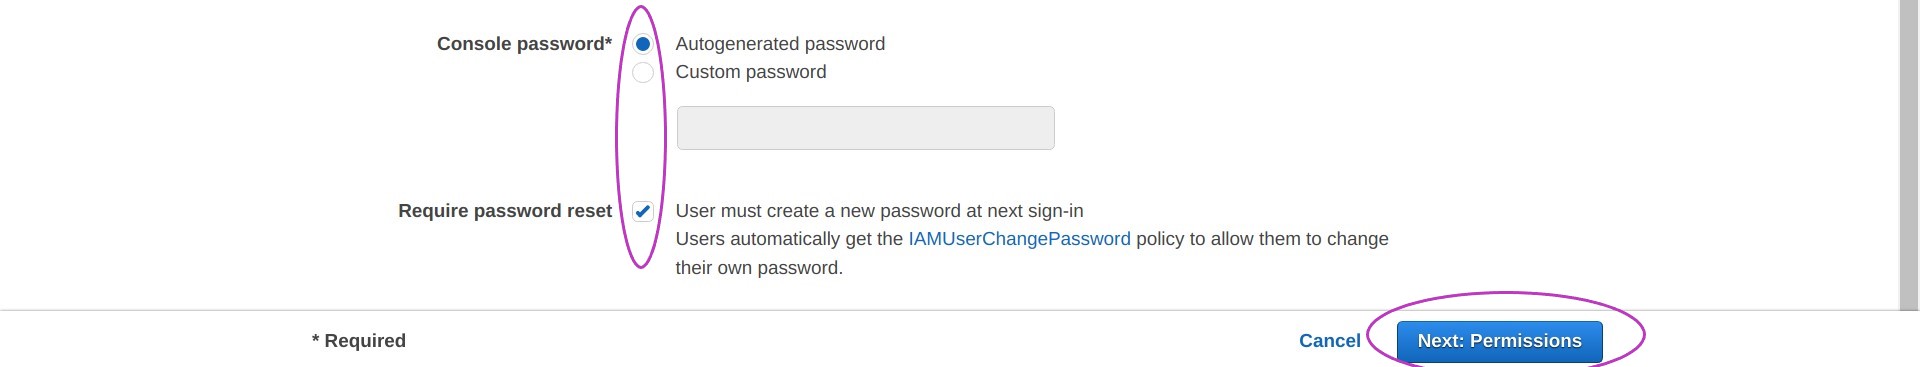 Screen shot of AWS Console IAM Add user page in a browser showing the options 'Autogenerated password' and 'User must create a new password at next sign-in' checked and circled, and the button "Next: Permissions" circled